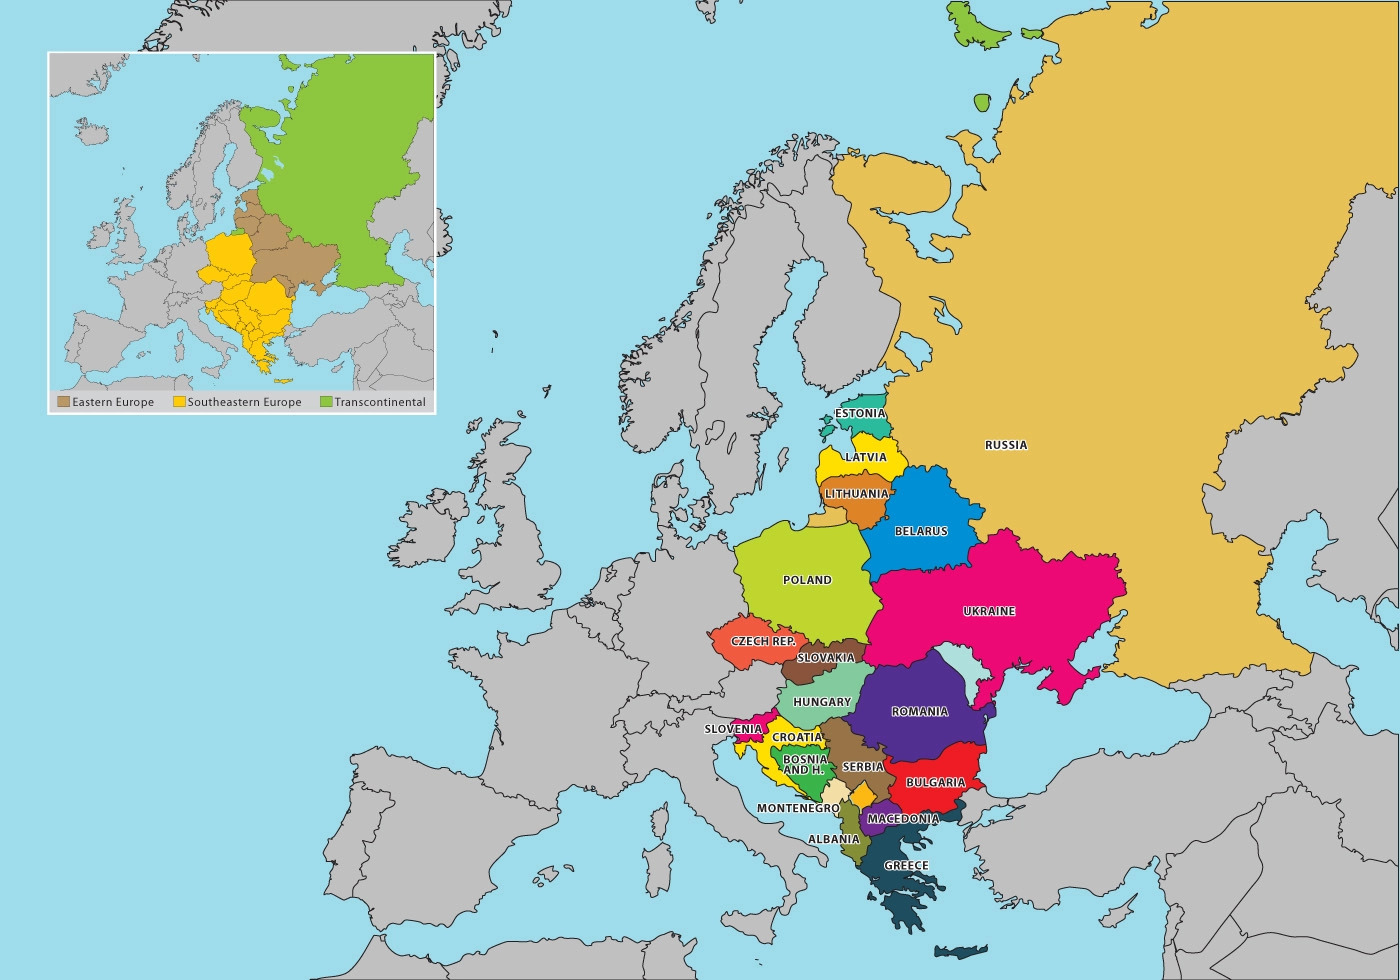 Eastern and Southeastern Europe. (Photo internet reproduction)